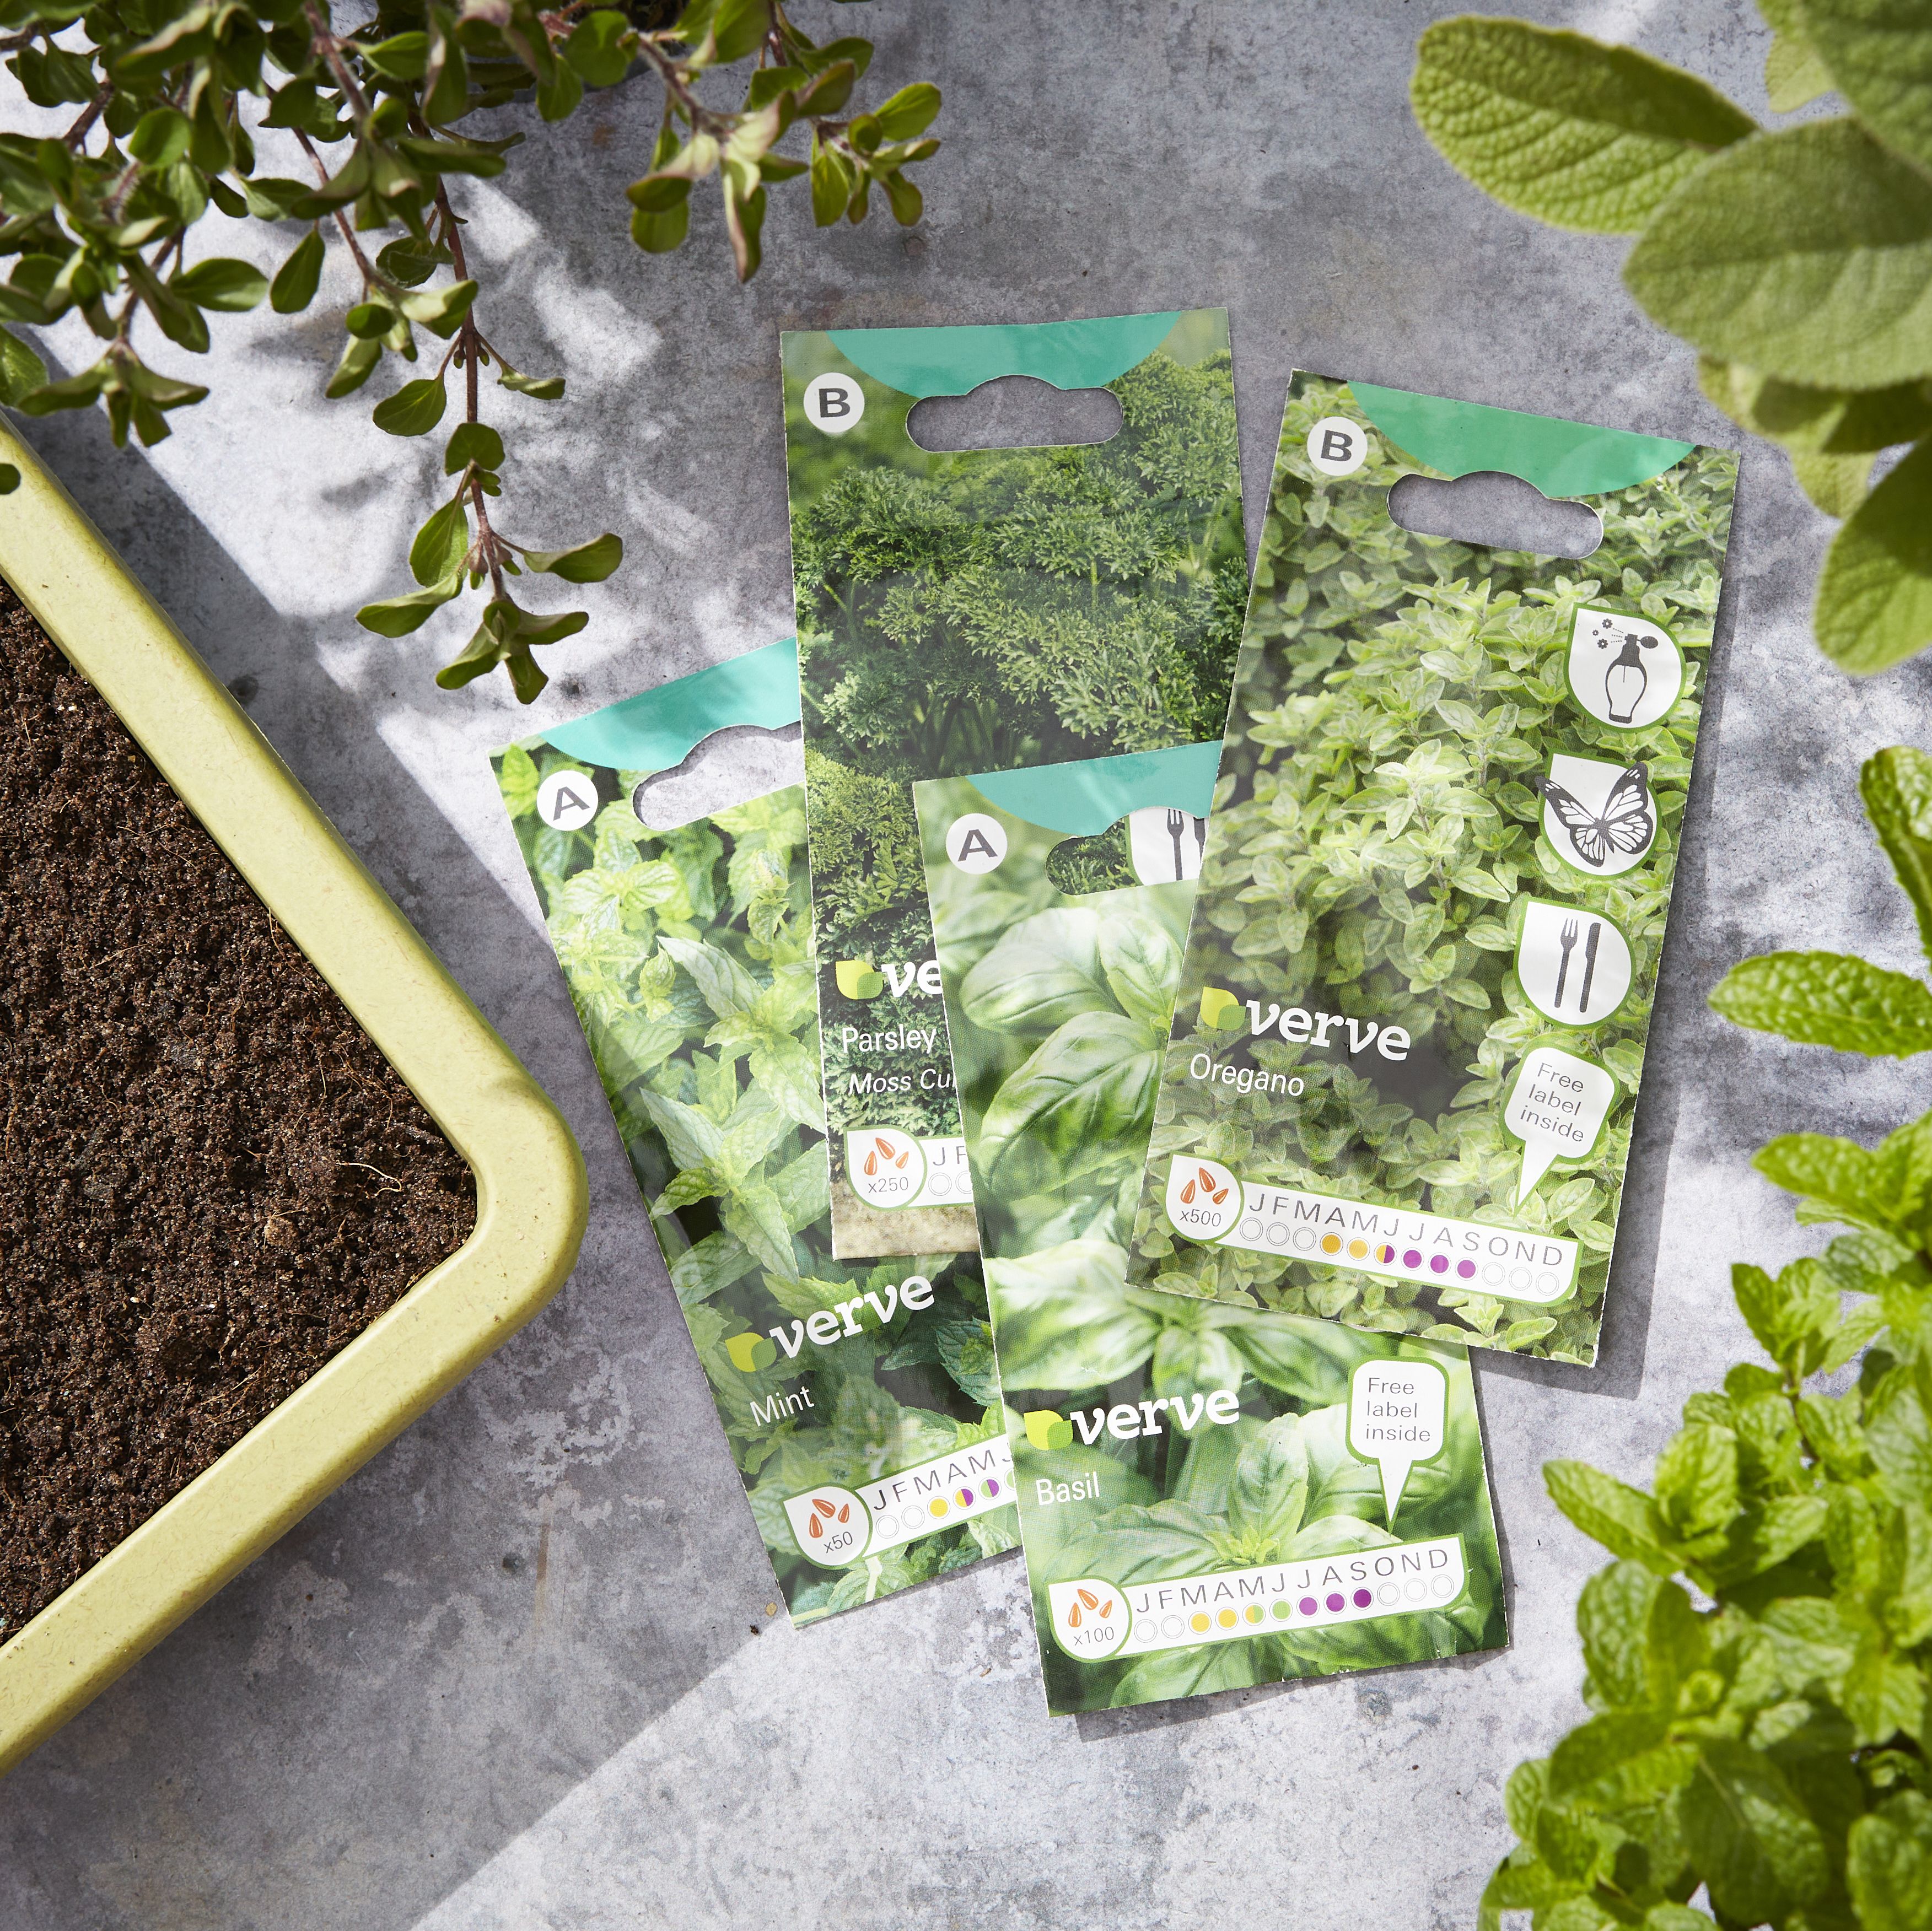 Verve Peat-free Seed & cutting Compost 10L